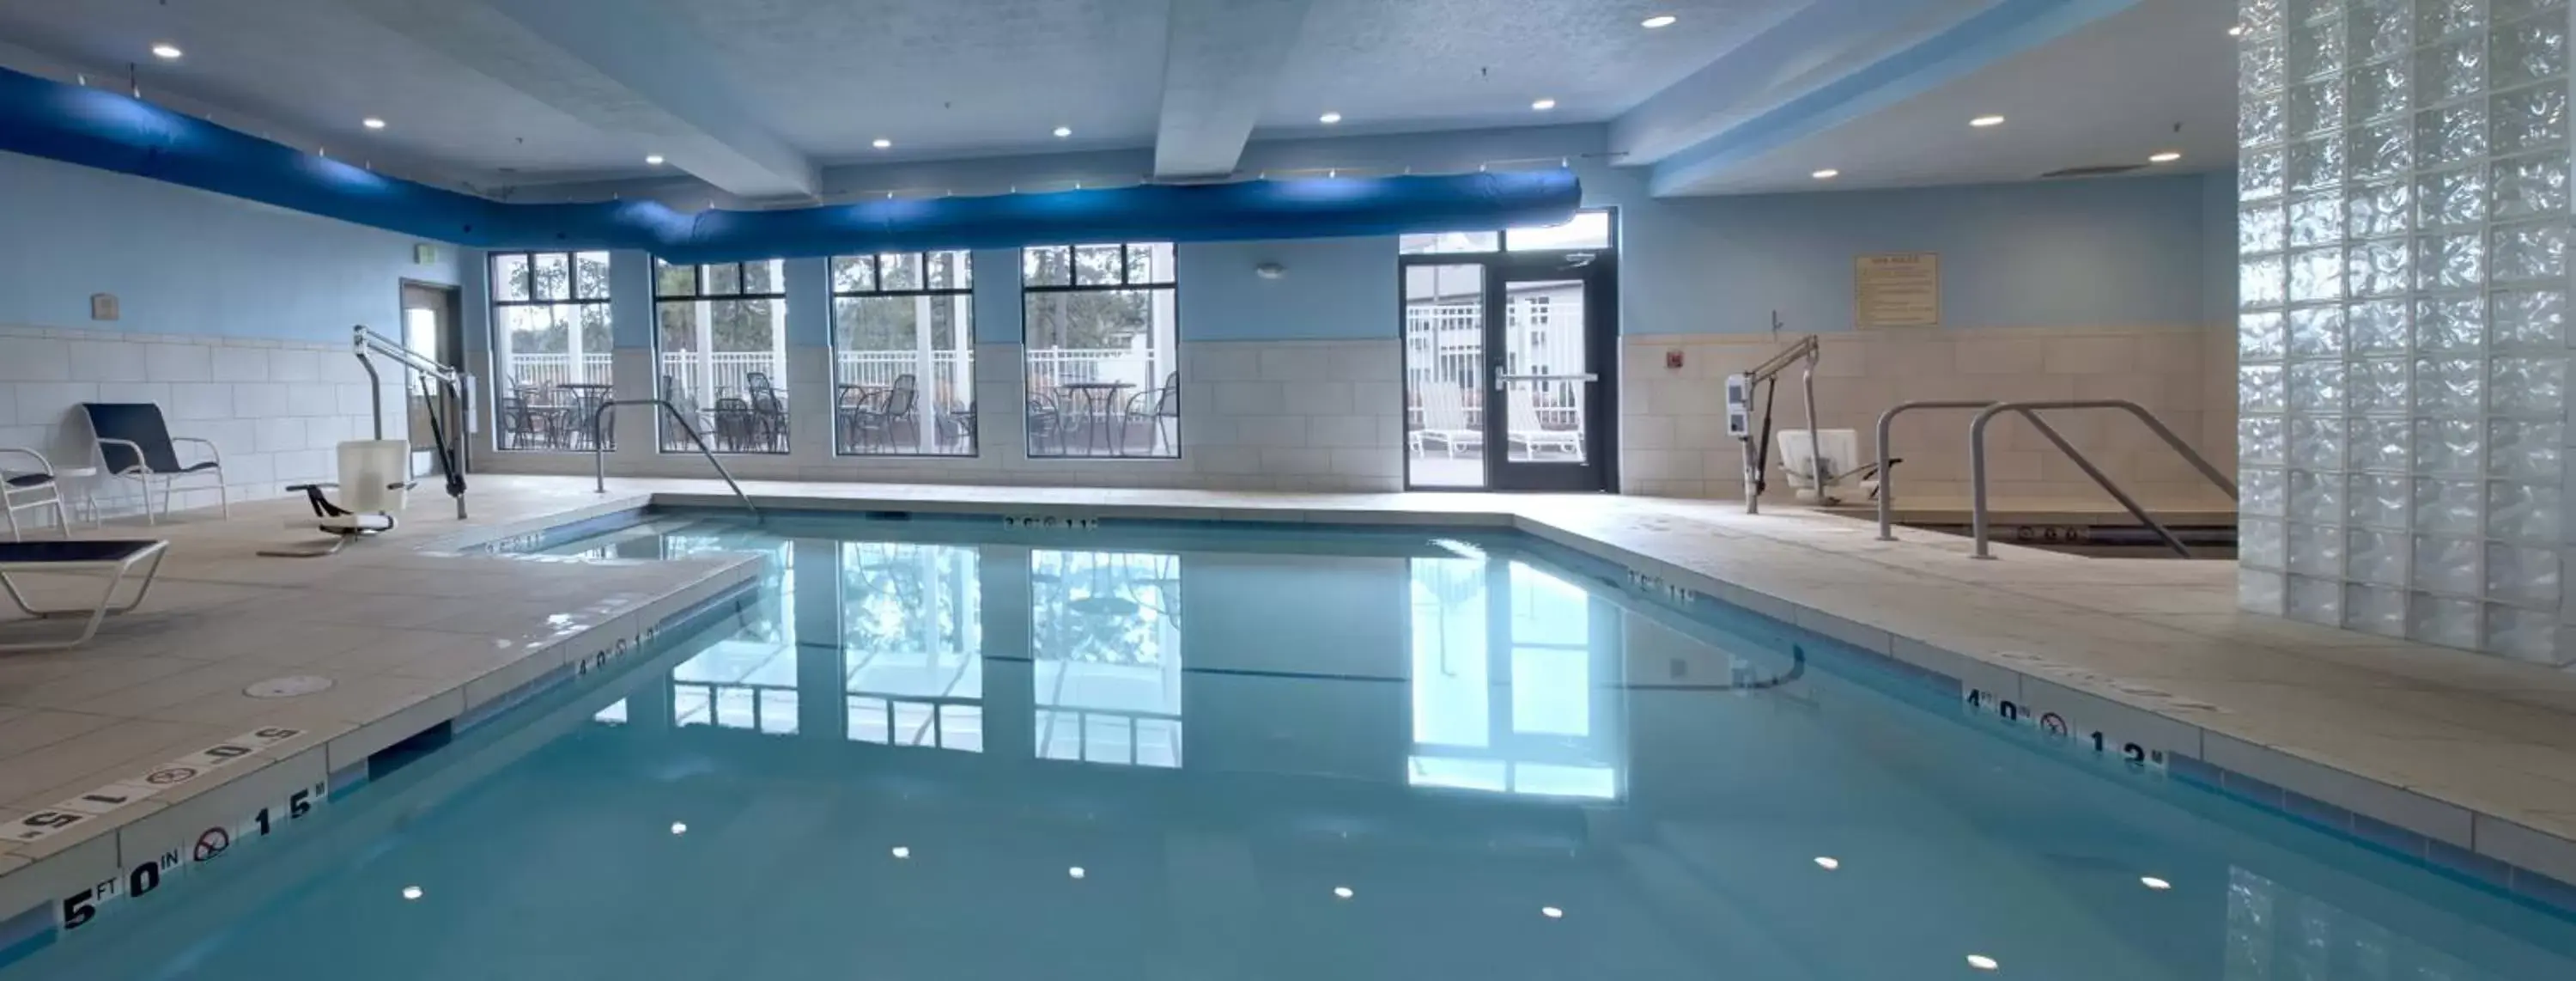 Swimming Pool in Holiday Inn Express Hotel & Suites Coeur D'Alene I-90 Exit 11, an IHG Hotel